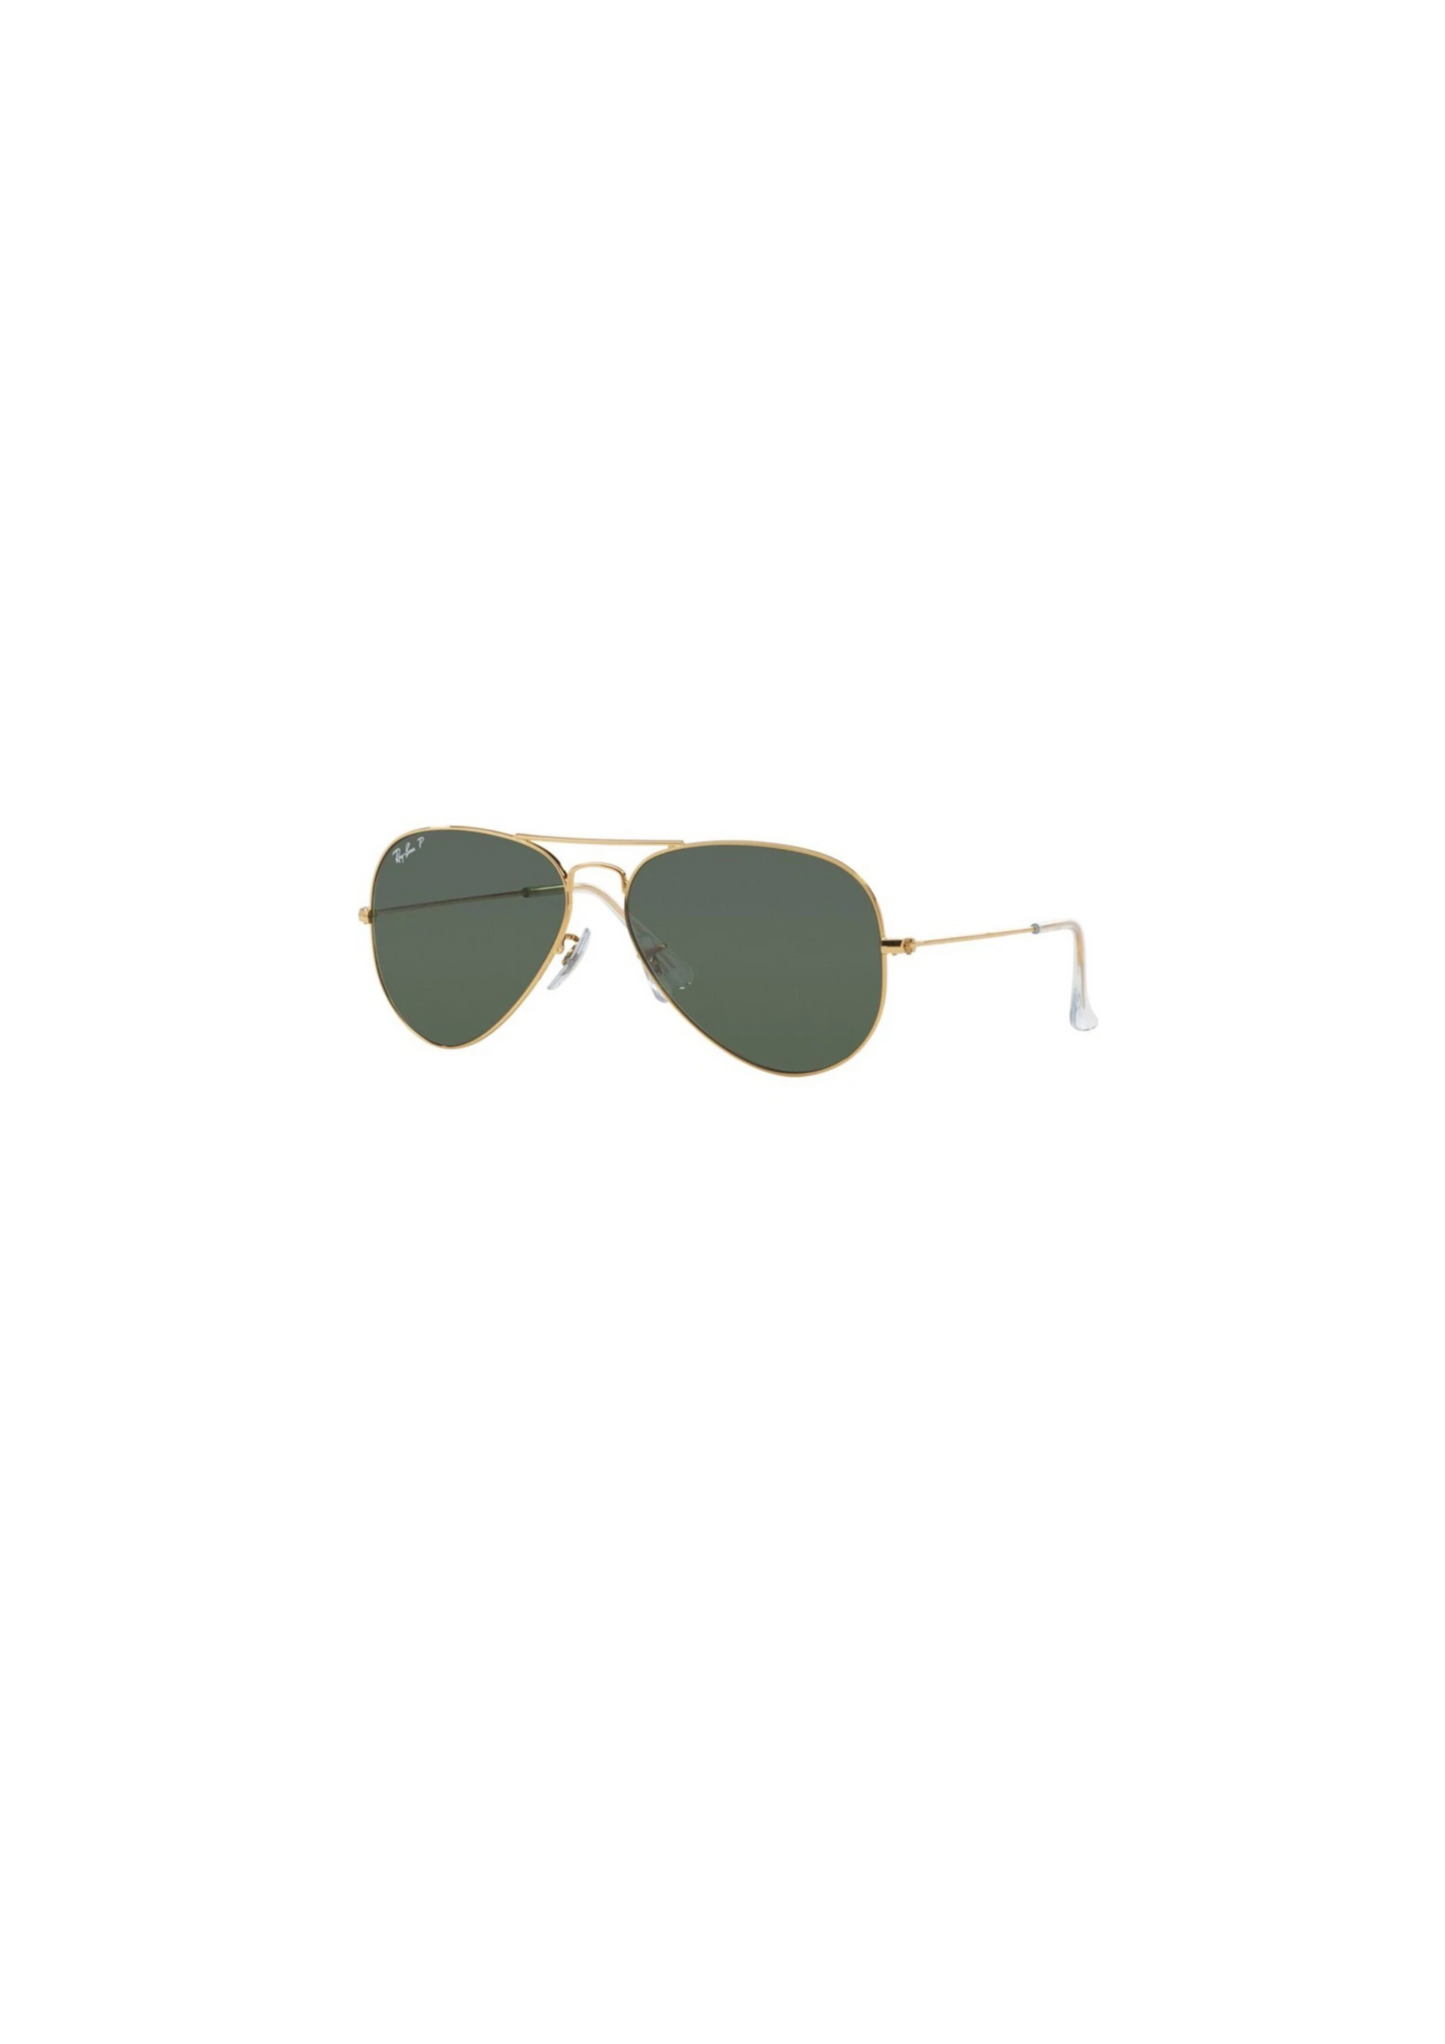 RAY BAN RB3025 L0205 58  Currently one of the most iconic sunglass models in the world, Ray-Ban Aviator Classic sunglasses were originally designed for U.S. aviators in 1937. Aviator Classic sunglasses are a timeless model that combines great aviator styling with exceptional quality, performance and comfort. 